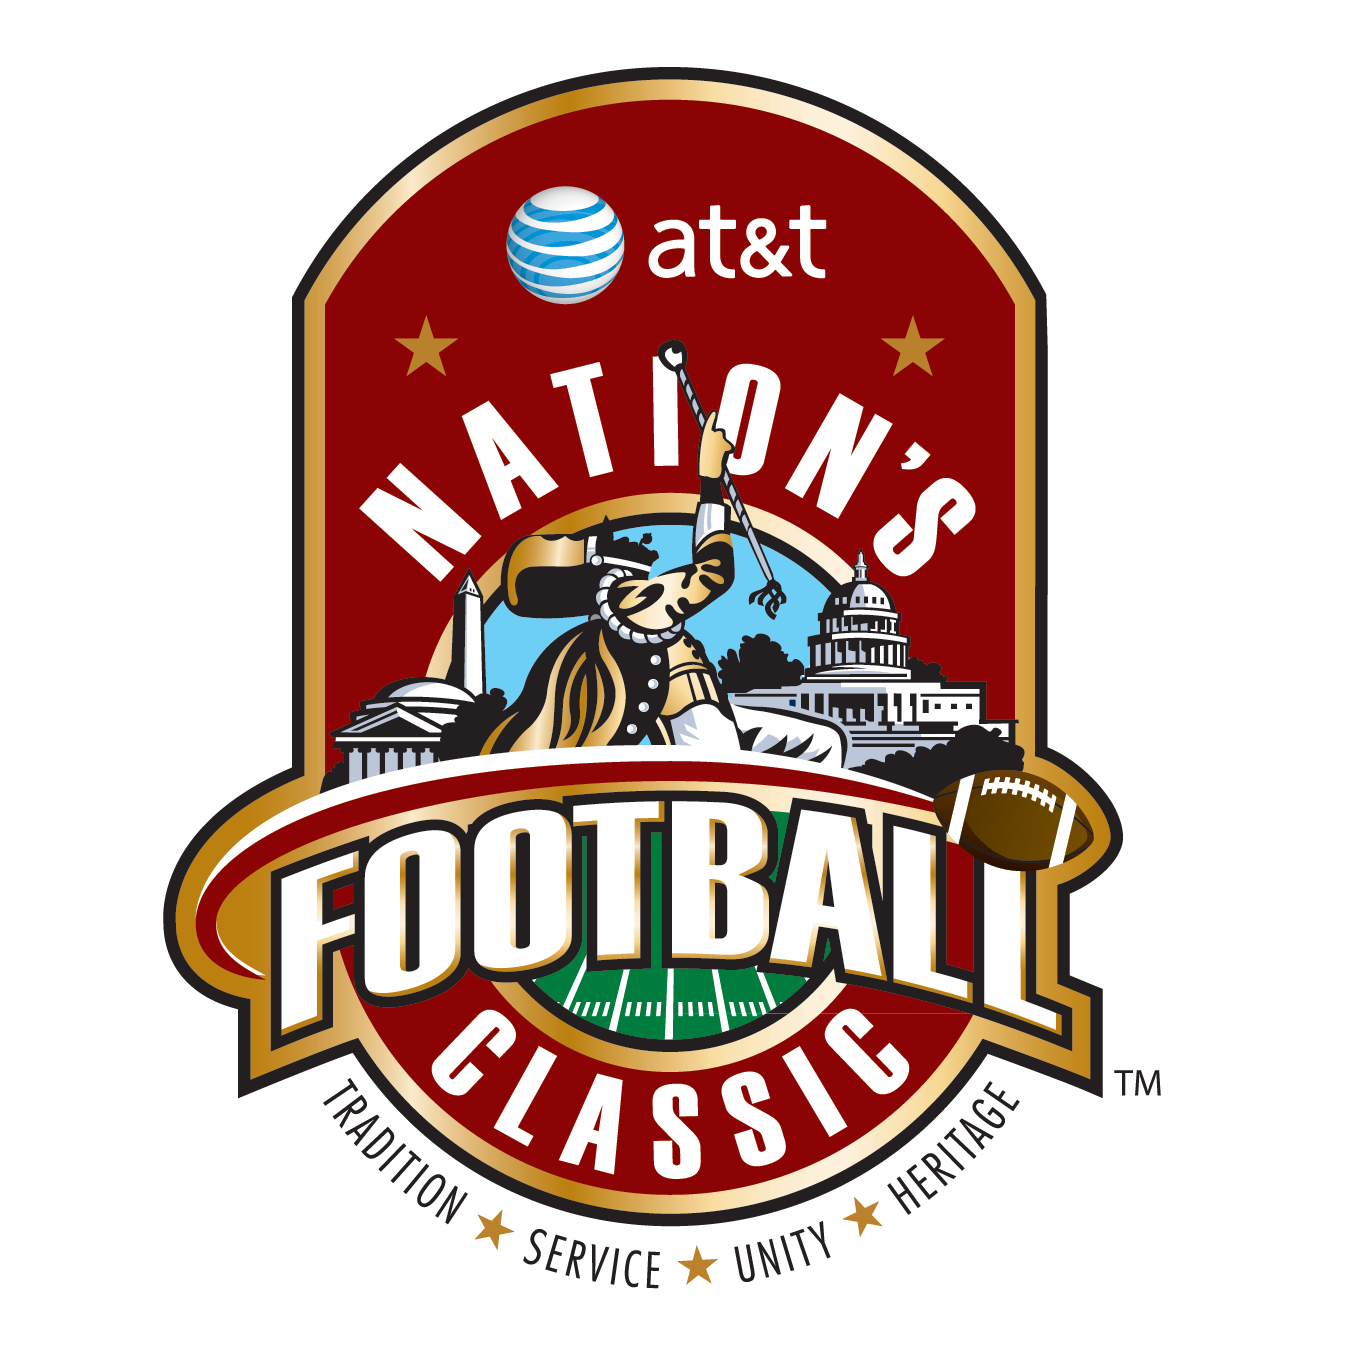 Official home of the AT&T Nation's Football Classic • RFK Stadium •  #nationsclassic